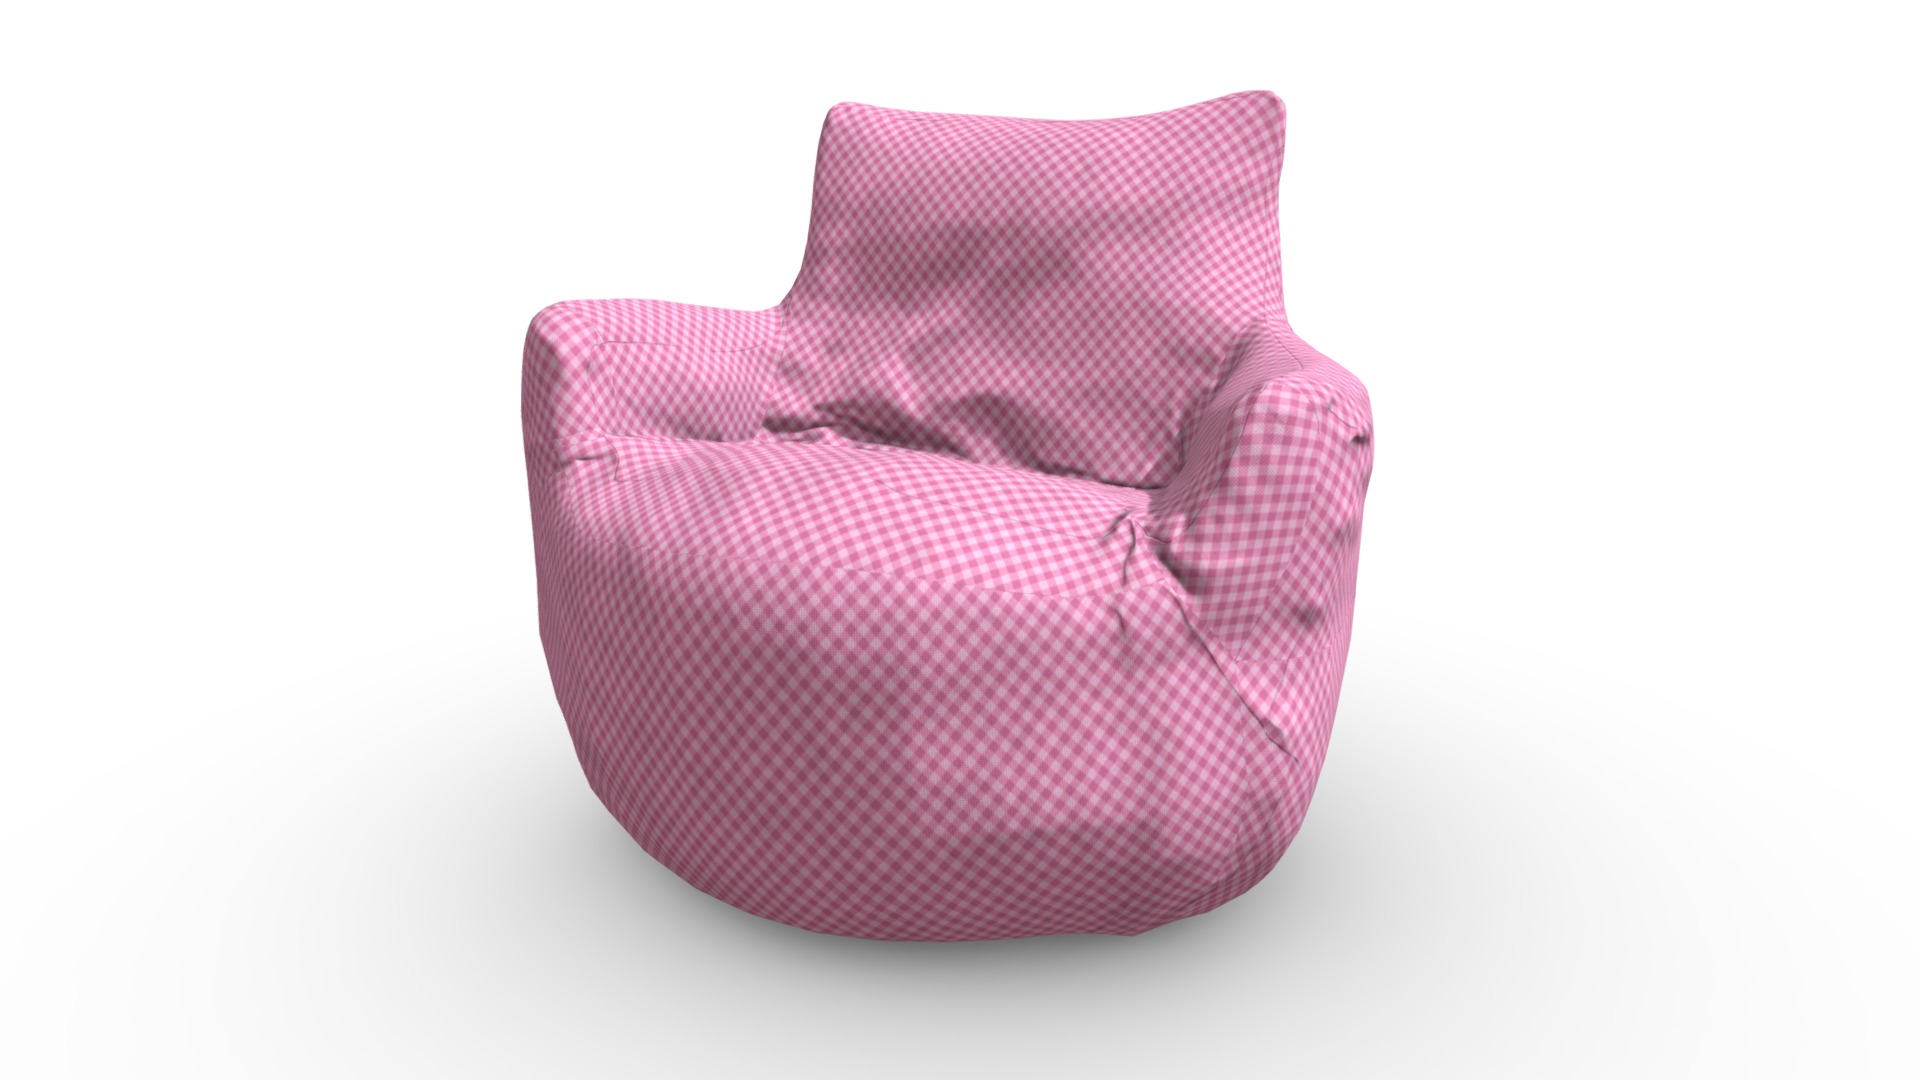 3D model Arm Chair Bean Bag - This is a 3D model of the Arm Chair Bean Bag. The 3D model is about a pink and white pillow.